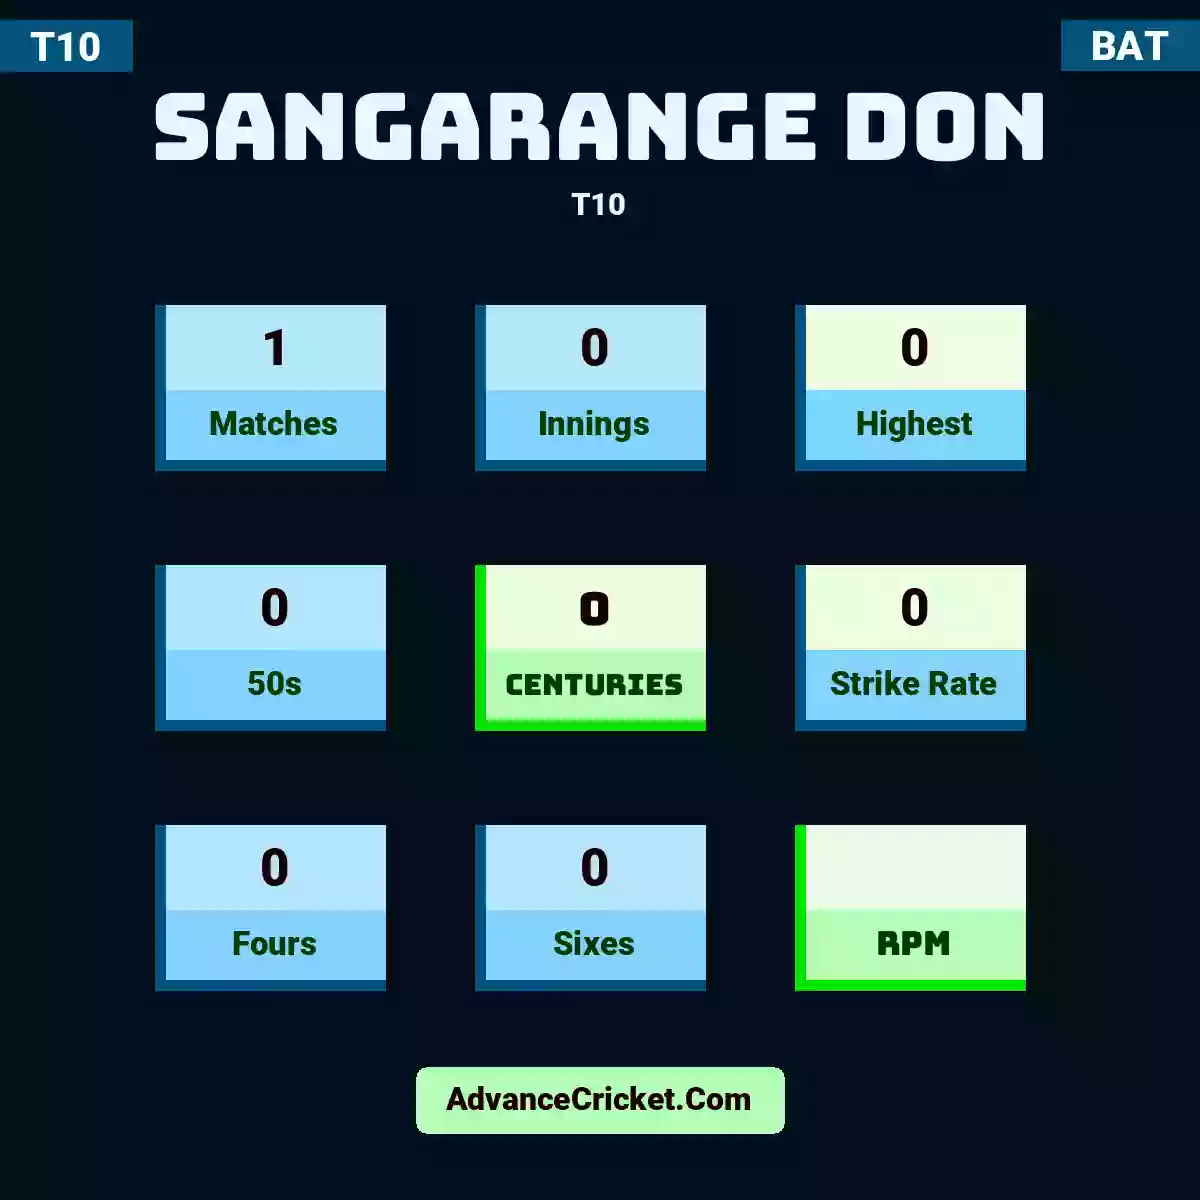 Sangarange Don T10 , Sangarange Don played 1 matches, scored 0 runs as highest, 0 half-centuries, and 0 centuries, with a strike rate of 0. S.Don hit 0 fours and 0 sixes.